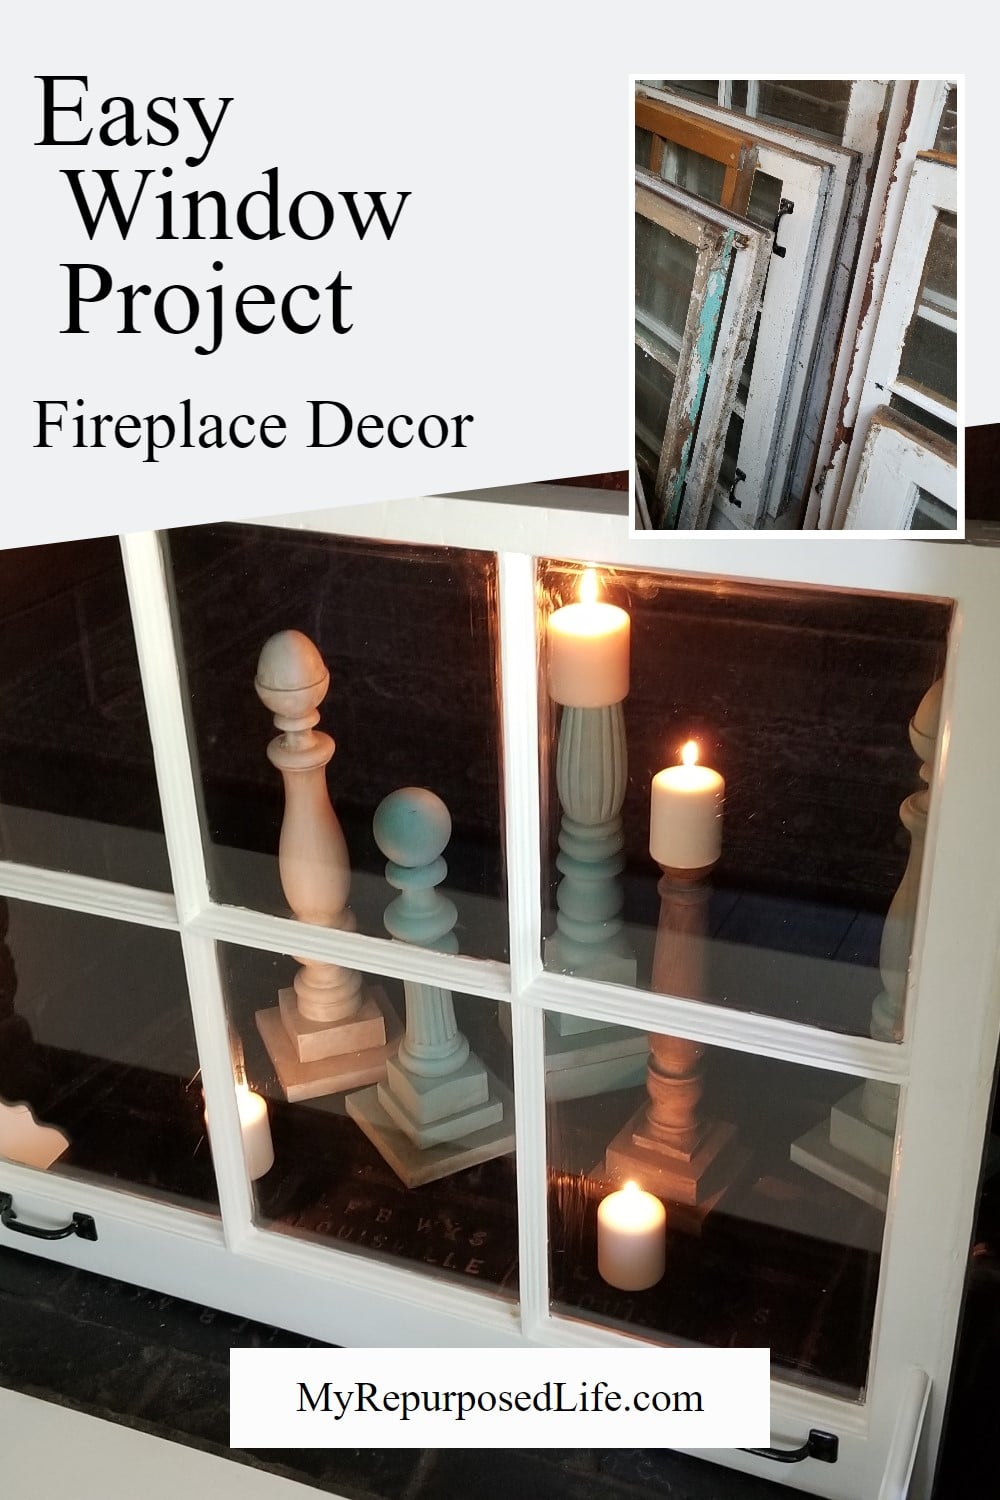 How to make a custom fireplace screen out of an old window. Easy project with step by step directions. This fireplace decor is for when you're not using your fireplace or if it is a non-working fireplace. #MyRepurposedLife #easy #window #project #fireplace via @repurposedlife